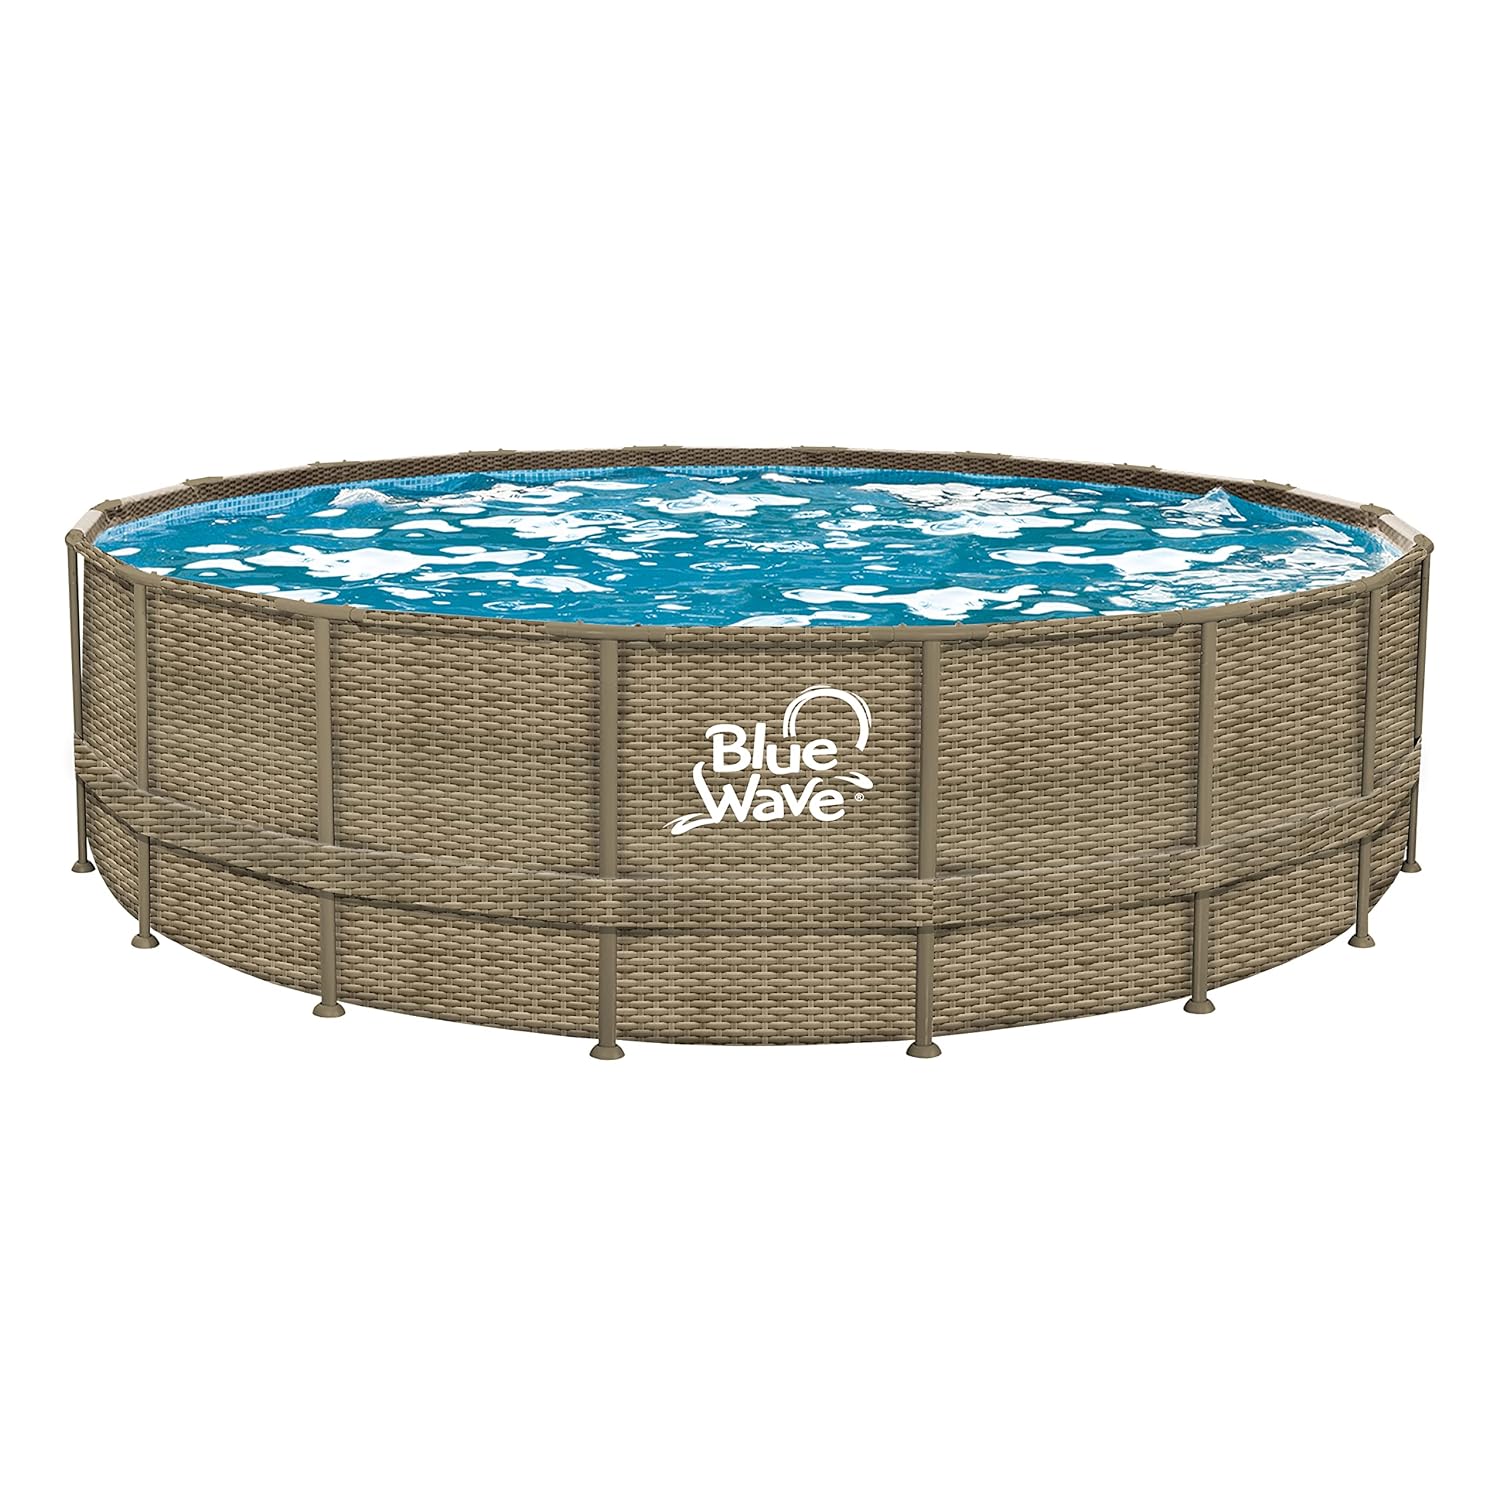 Blue Wave NB19798 24-ft Round x 52-in deep Dark Cocoa Wicker Frame Package Above Ground Swimming Pool with Cover, x, Brown…